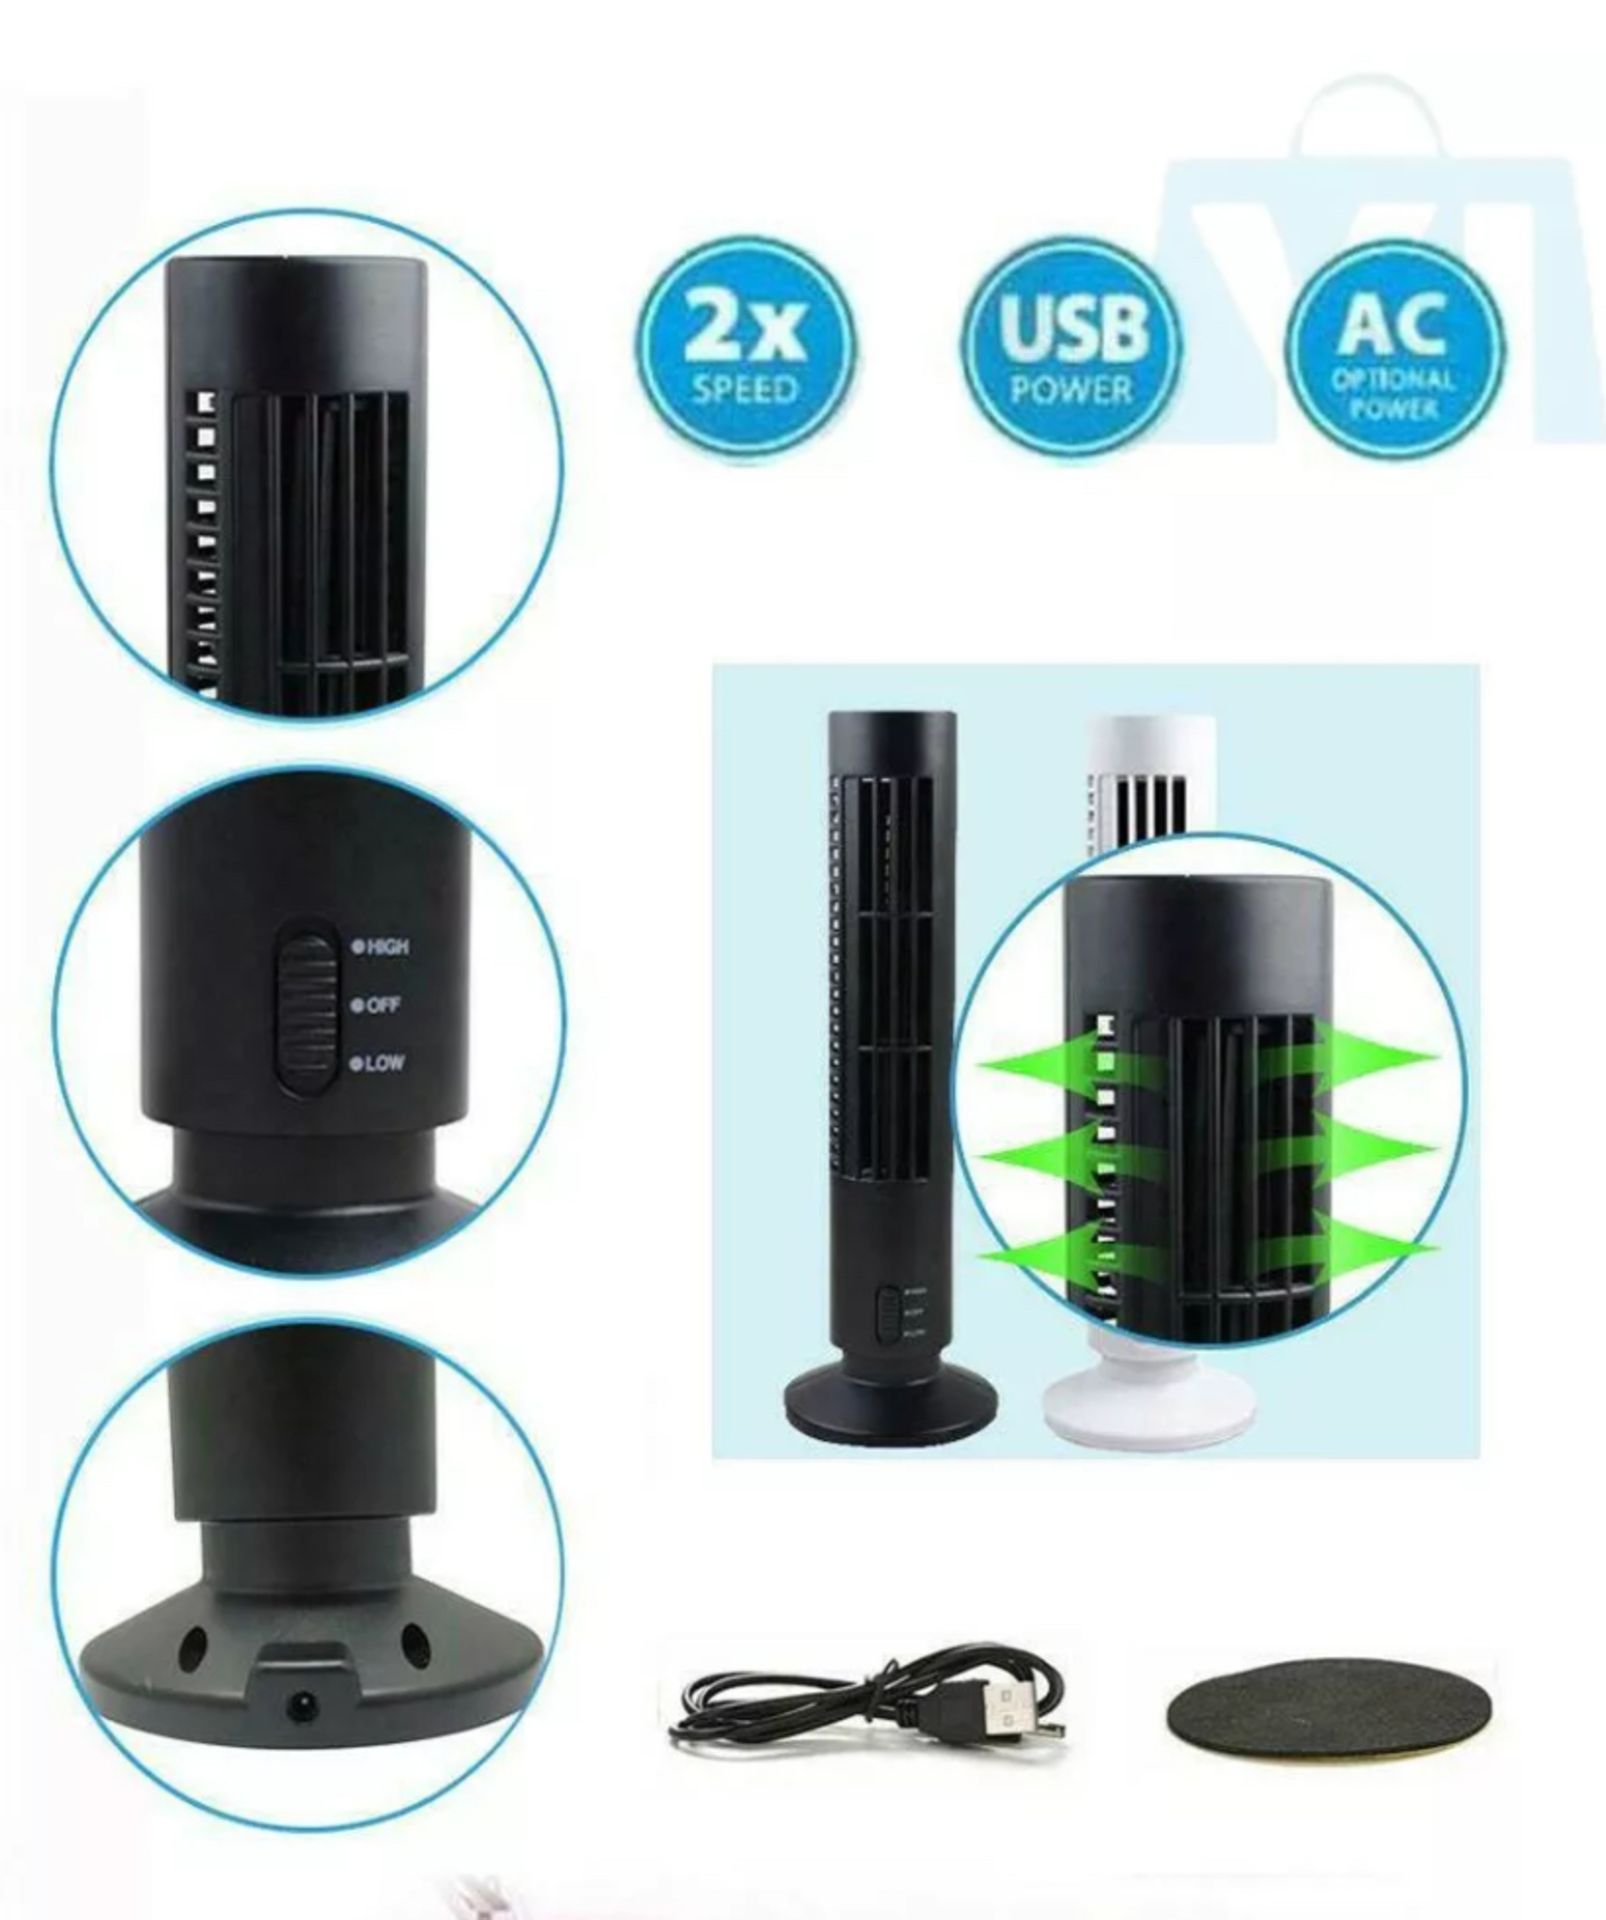 Brand New Portable Usb Tower Fan Cooling Bladeless 2 Speed Air Conditioner Pc Laptop Desk